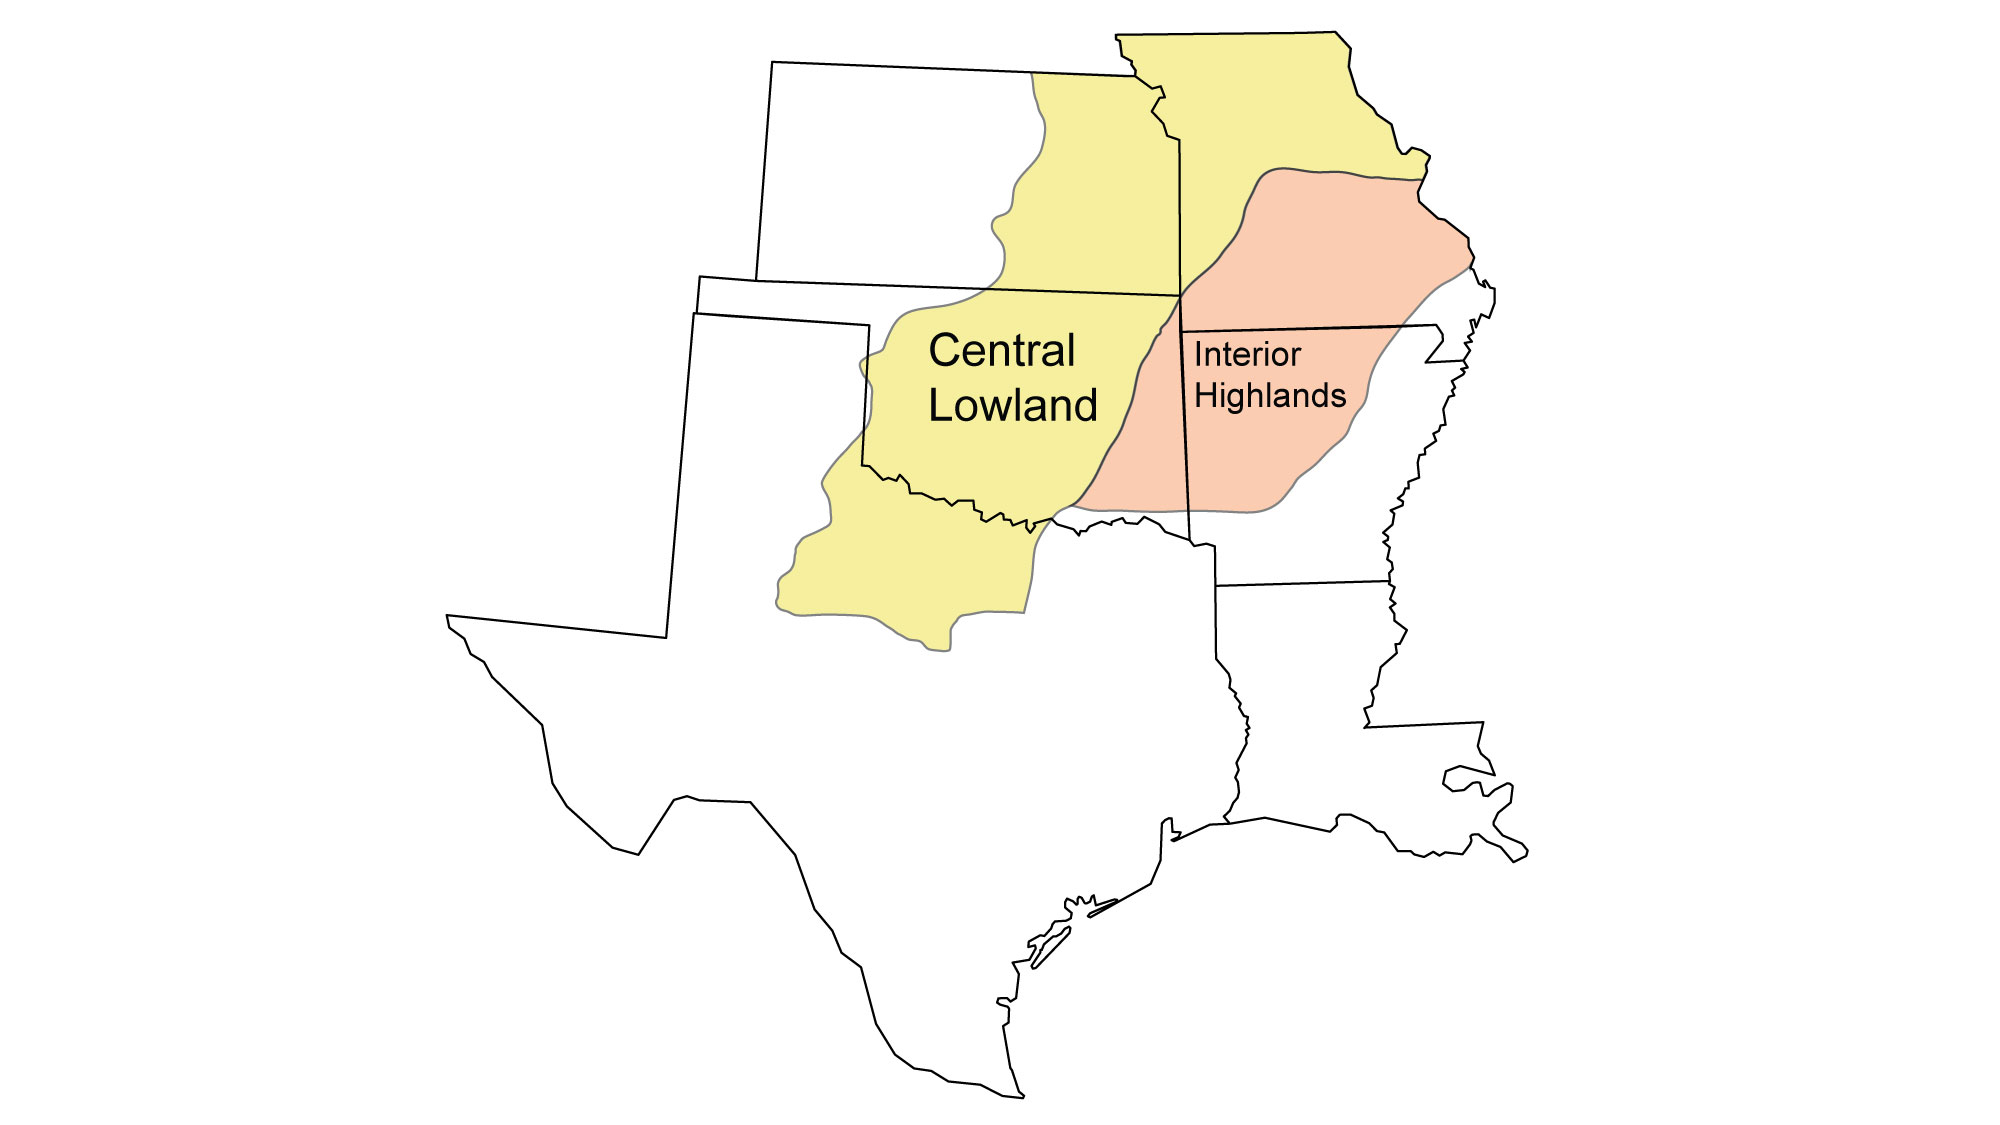 Simple map showing the Central Lowland and Interior Highlands regions, which include nearly all of Missouri and Oklahoma, and portions of Kansas, Arkansas, and Texas.